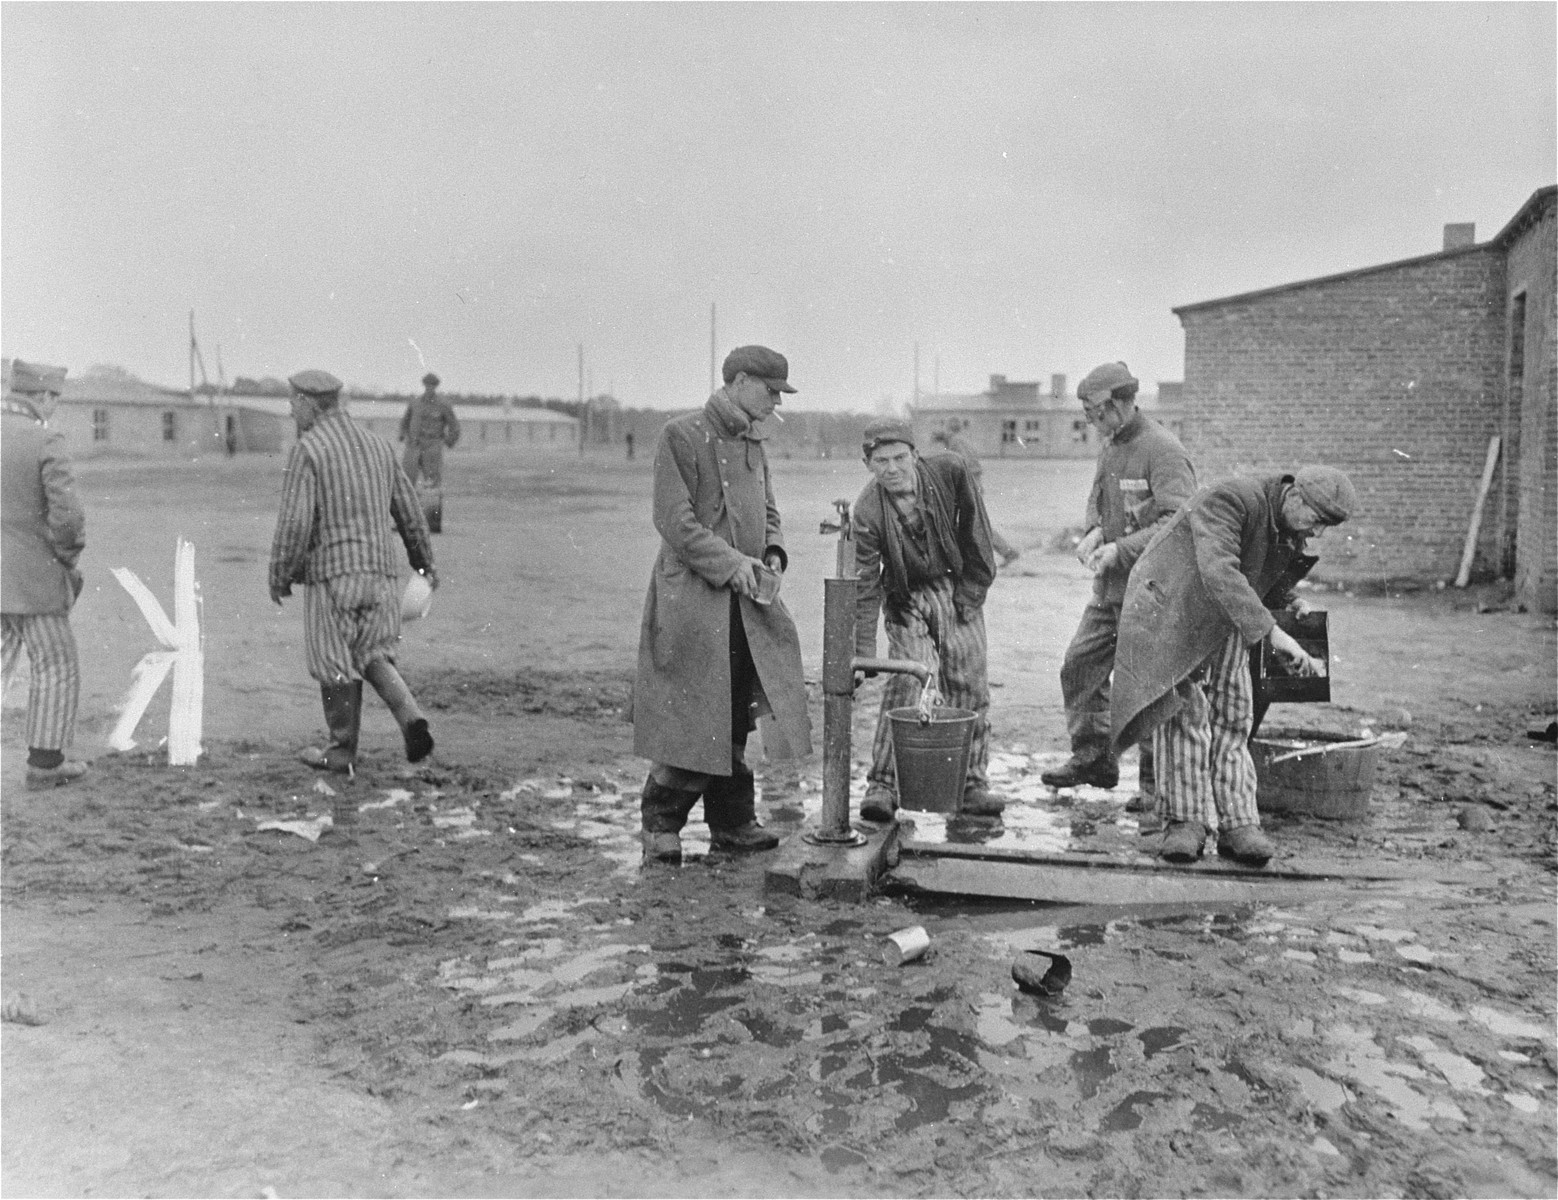 Survivors get water at one of the community pumps in the newly liberated Woebbelin concentration camp.